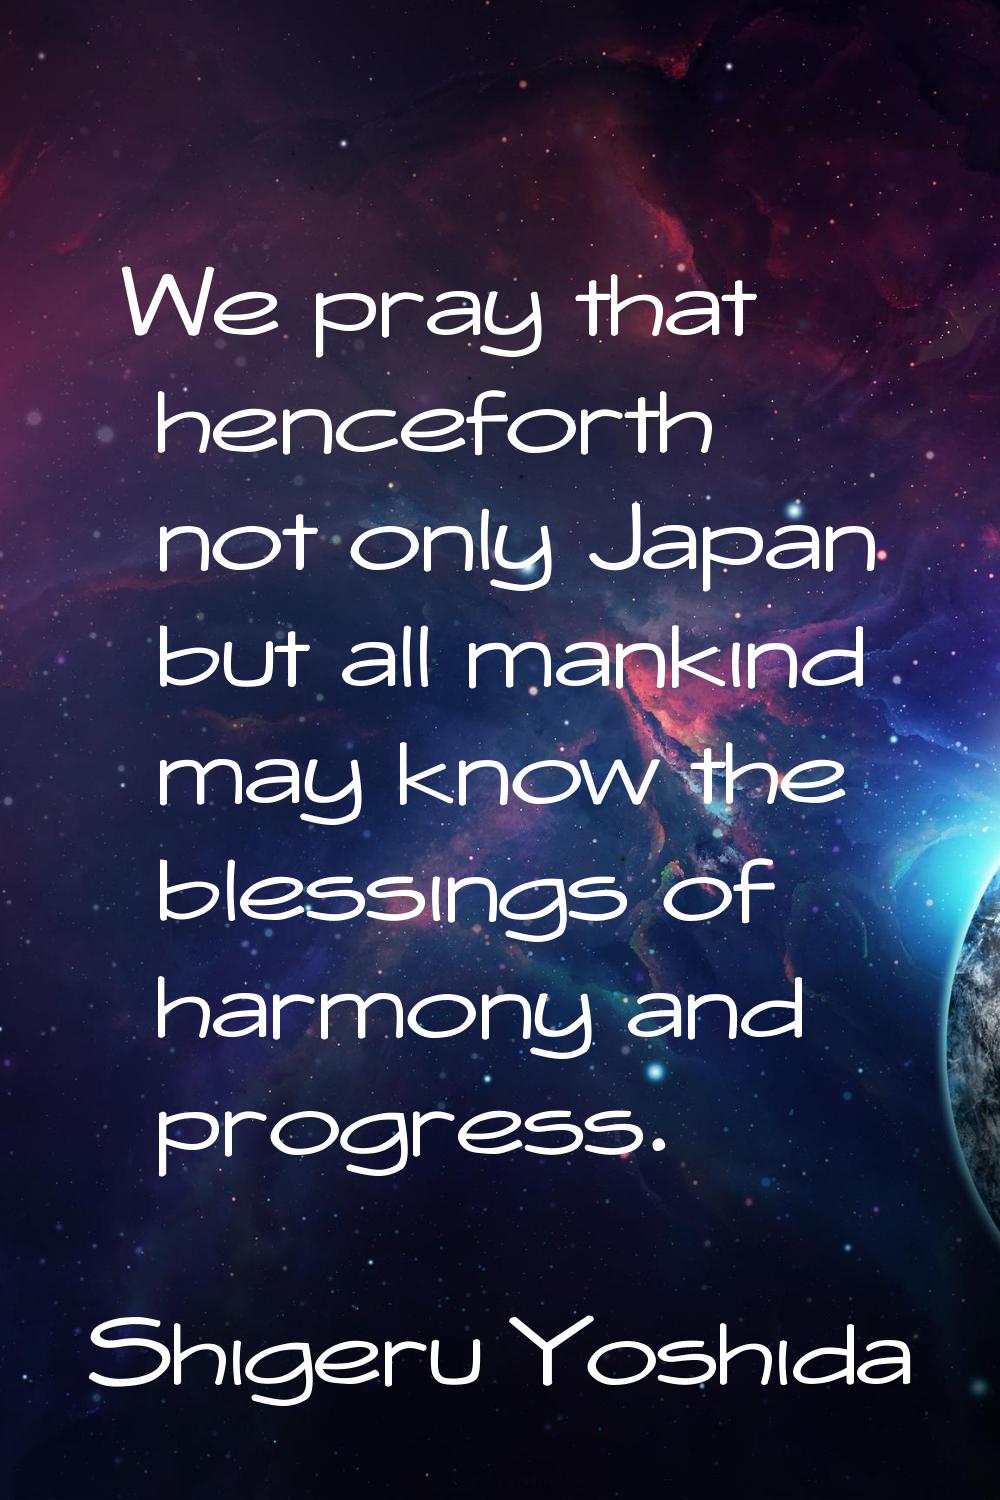 We pray that henceforth not only Japan but all mankind may know the blessings of harmony and progre